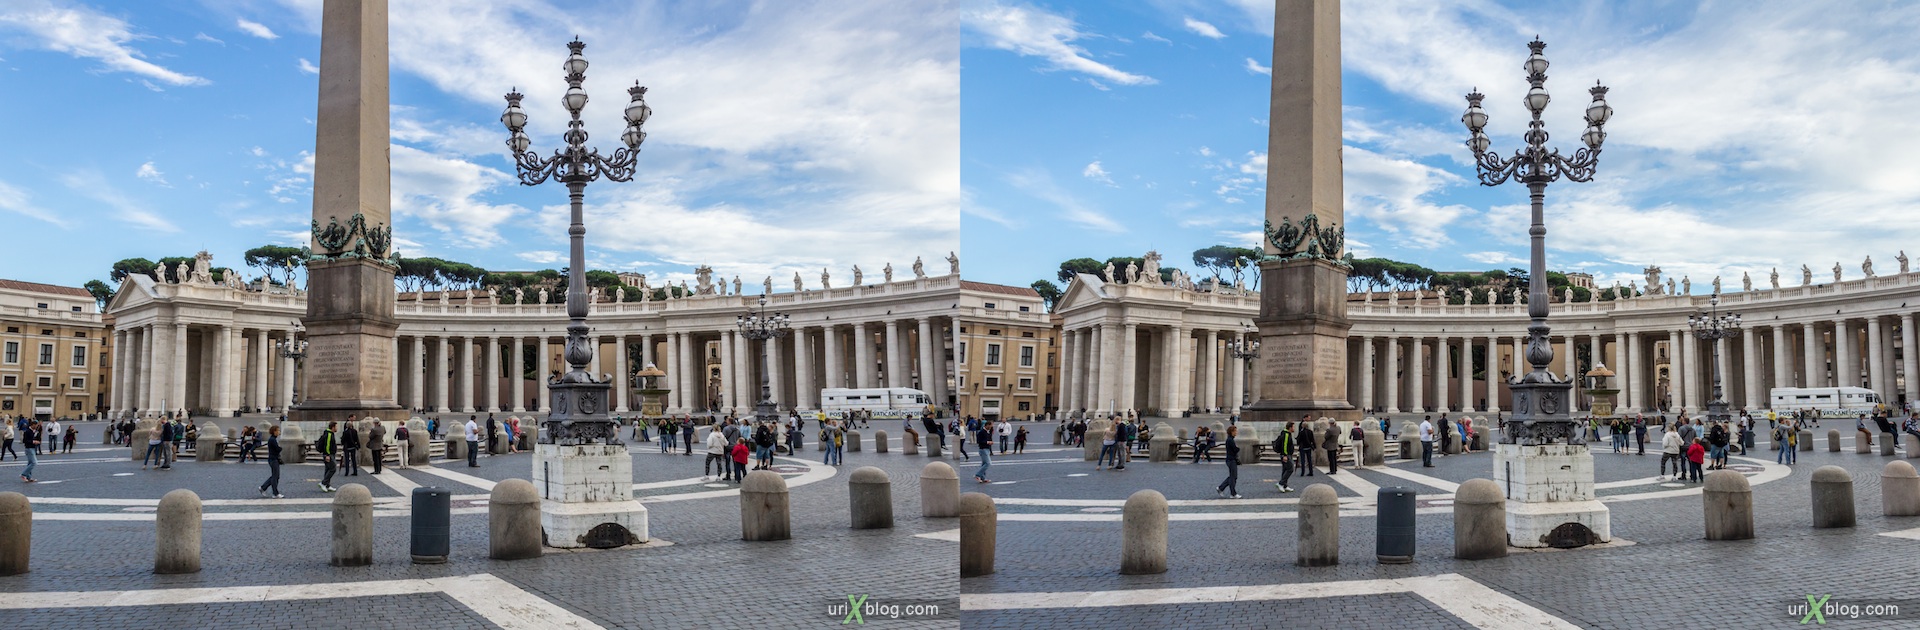 2012, Saint Peter's Square, Vatican, Rome, Italy, 3D, stereo pair, cross-eyed, crossview, cross view stereo pair